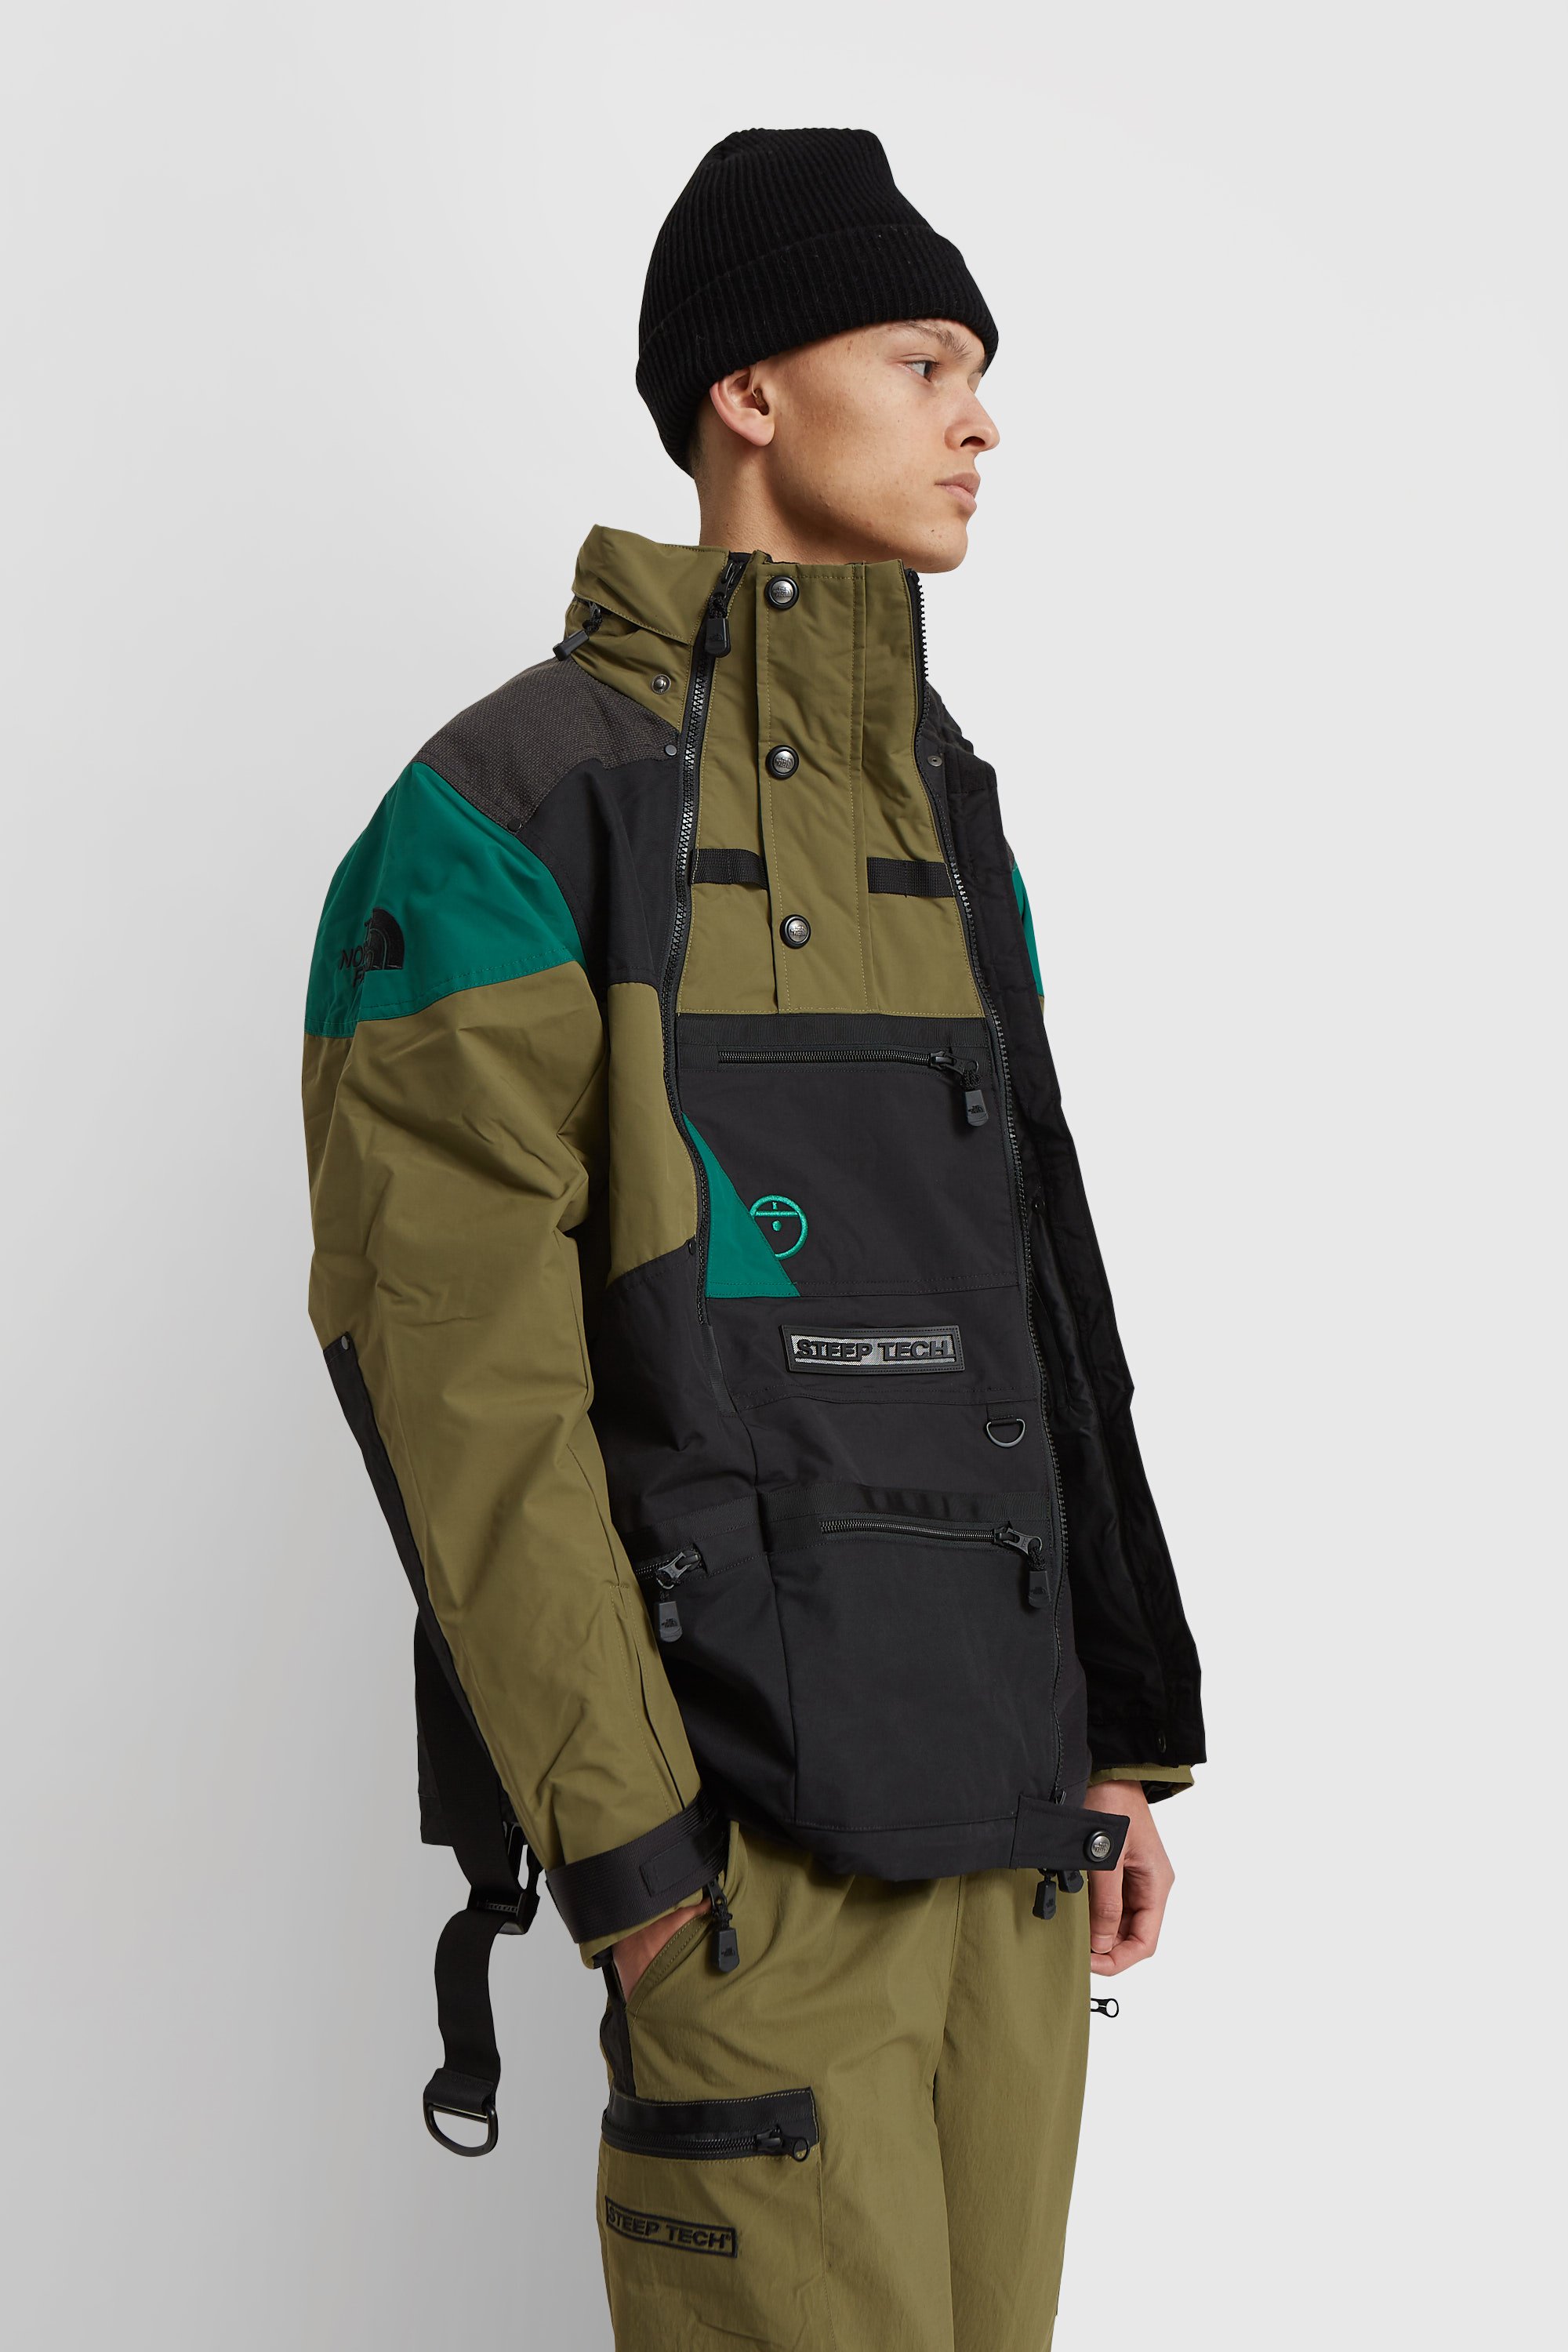 north face steep tech work jacket